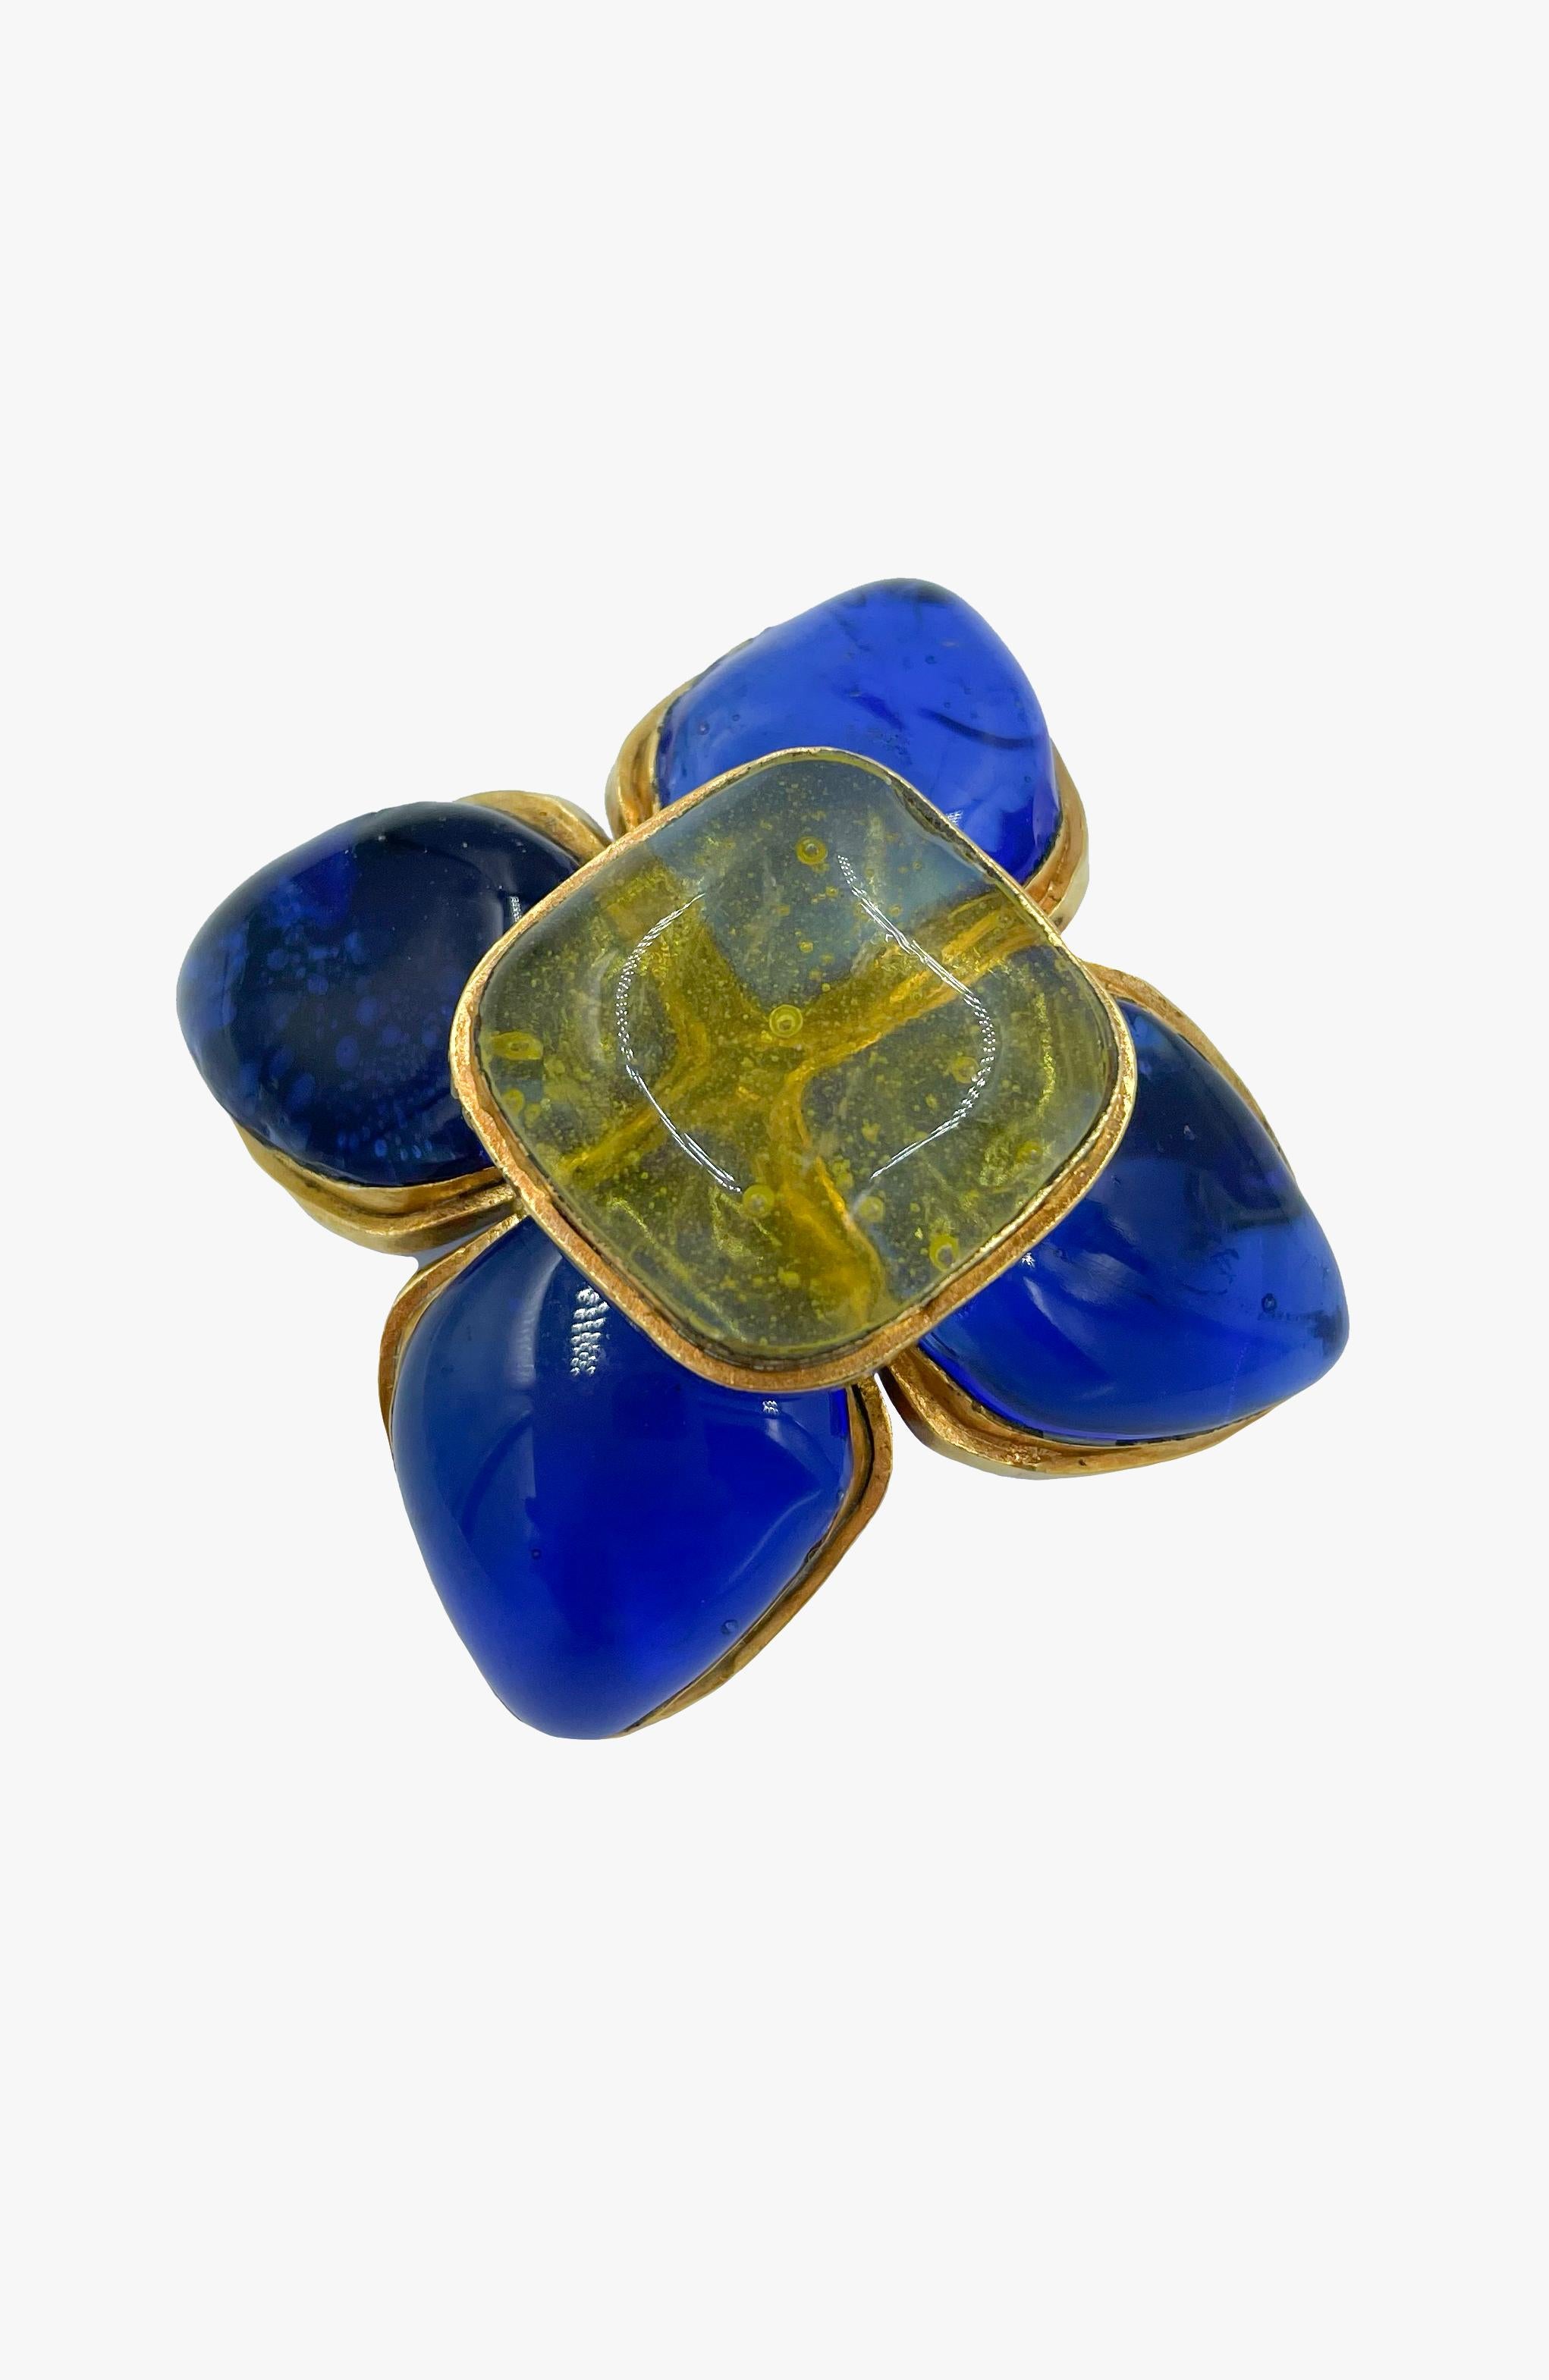 Chanel brooch made of Gripoix glass in a form of 4-petal flower in blue and yellow colors. 
Marked. 
Season 26. 1989 year. 
Measurements: 
Length - 8 cm
Width -  7 cm
Condition: good; some scratches throughout metal. 

........Additional information